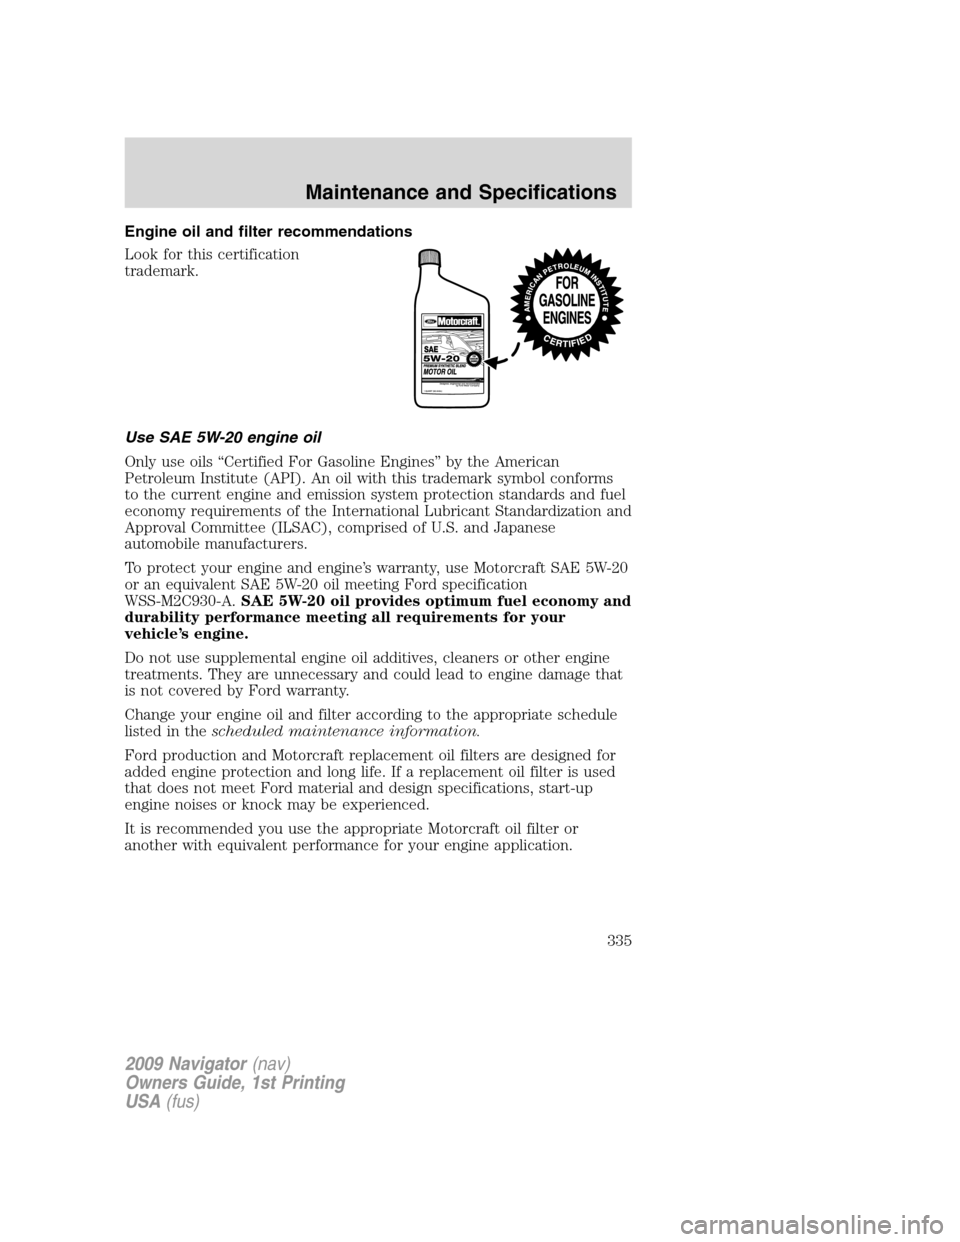 LINCOLN NAVIGATOR 2009 Owners Guide Engine oil and filter recommendations
Look for this certification
trademark.
Use SAE 5W-20 engine oil
Only use oils “Certified For Gasoline Engines” by the American
Petroleum Institute (API). An o